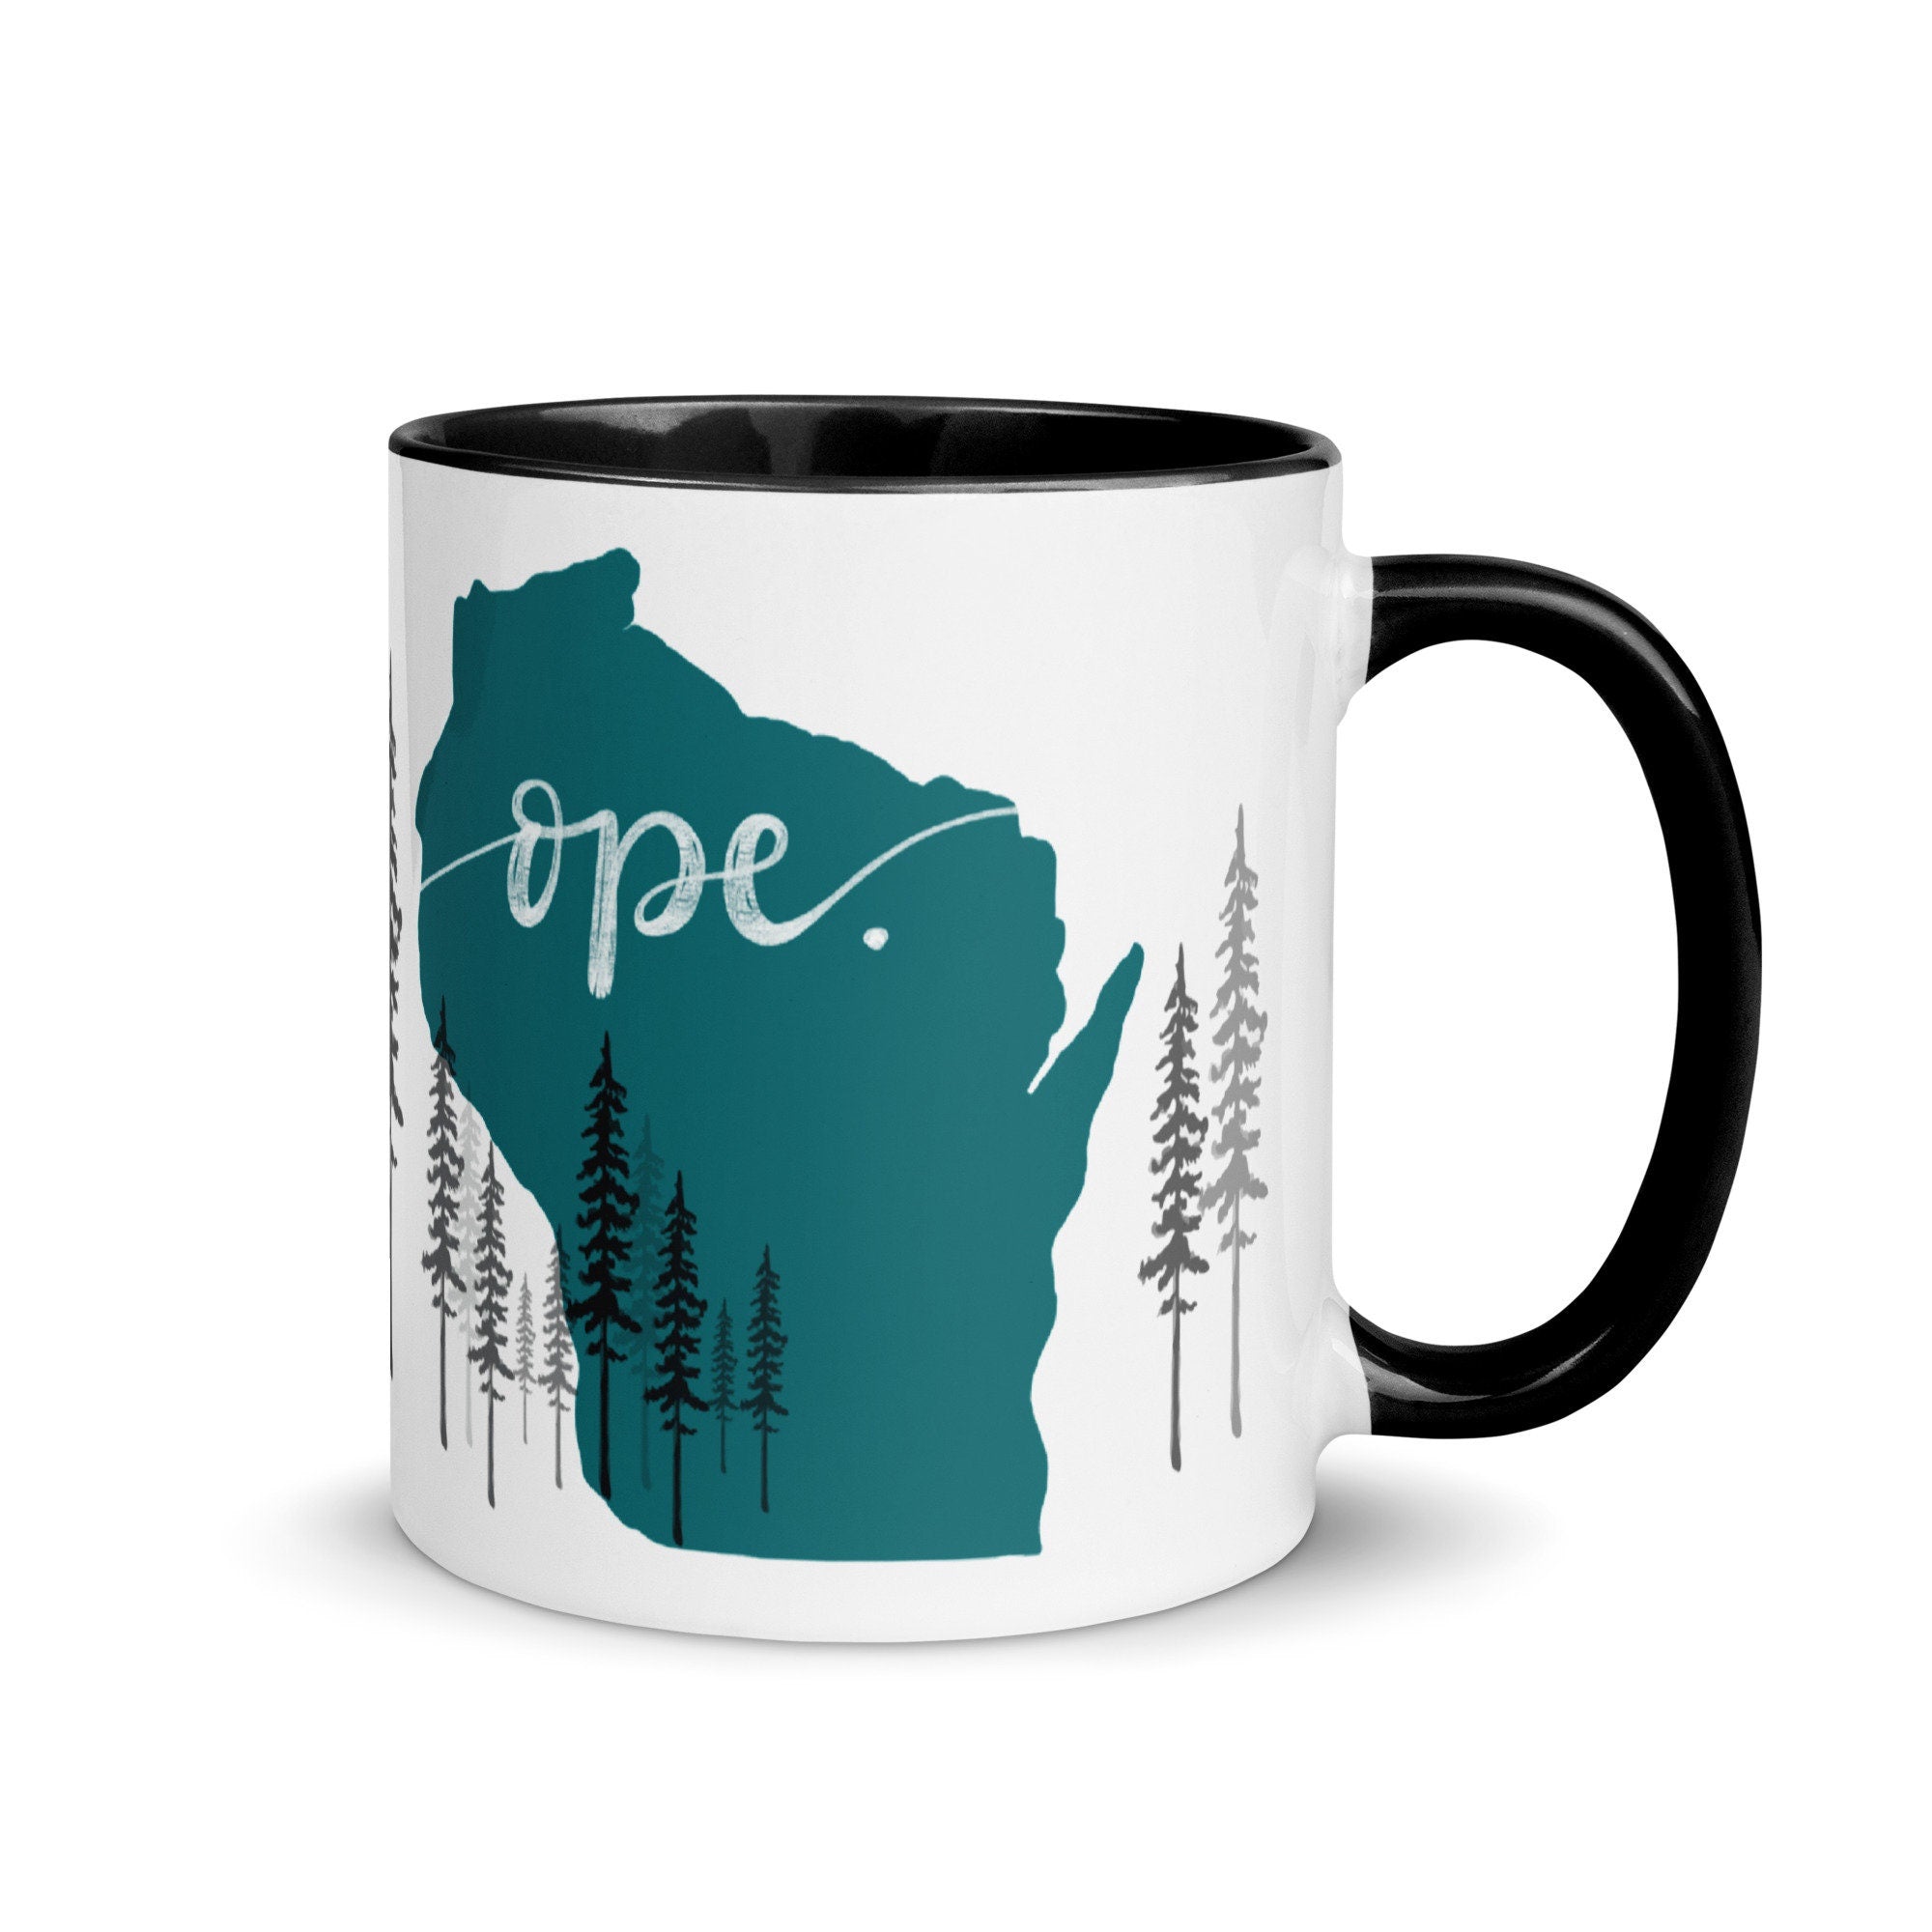 Funny Wisconsin Sayings Ope coffee Mug Teal - How you know you live in Wisconsin Funny Gift For Local - Moving to Wisconsin Housewarming